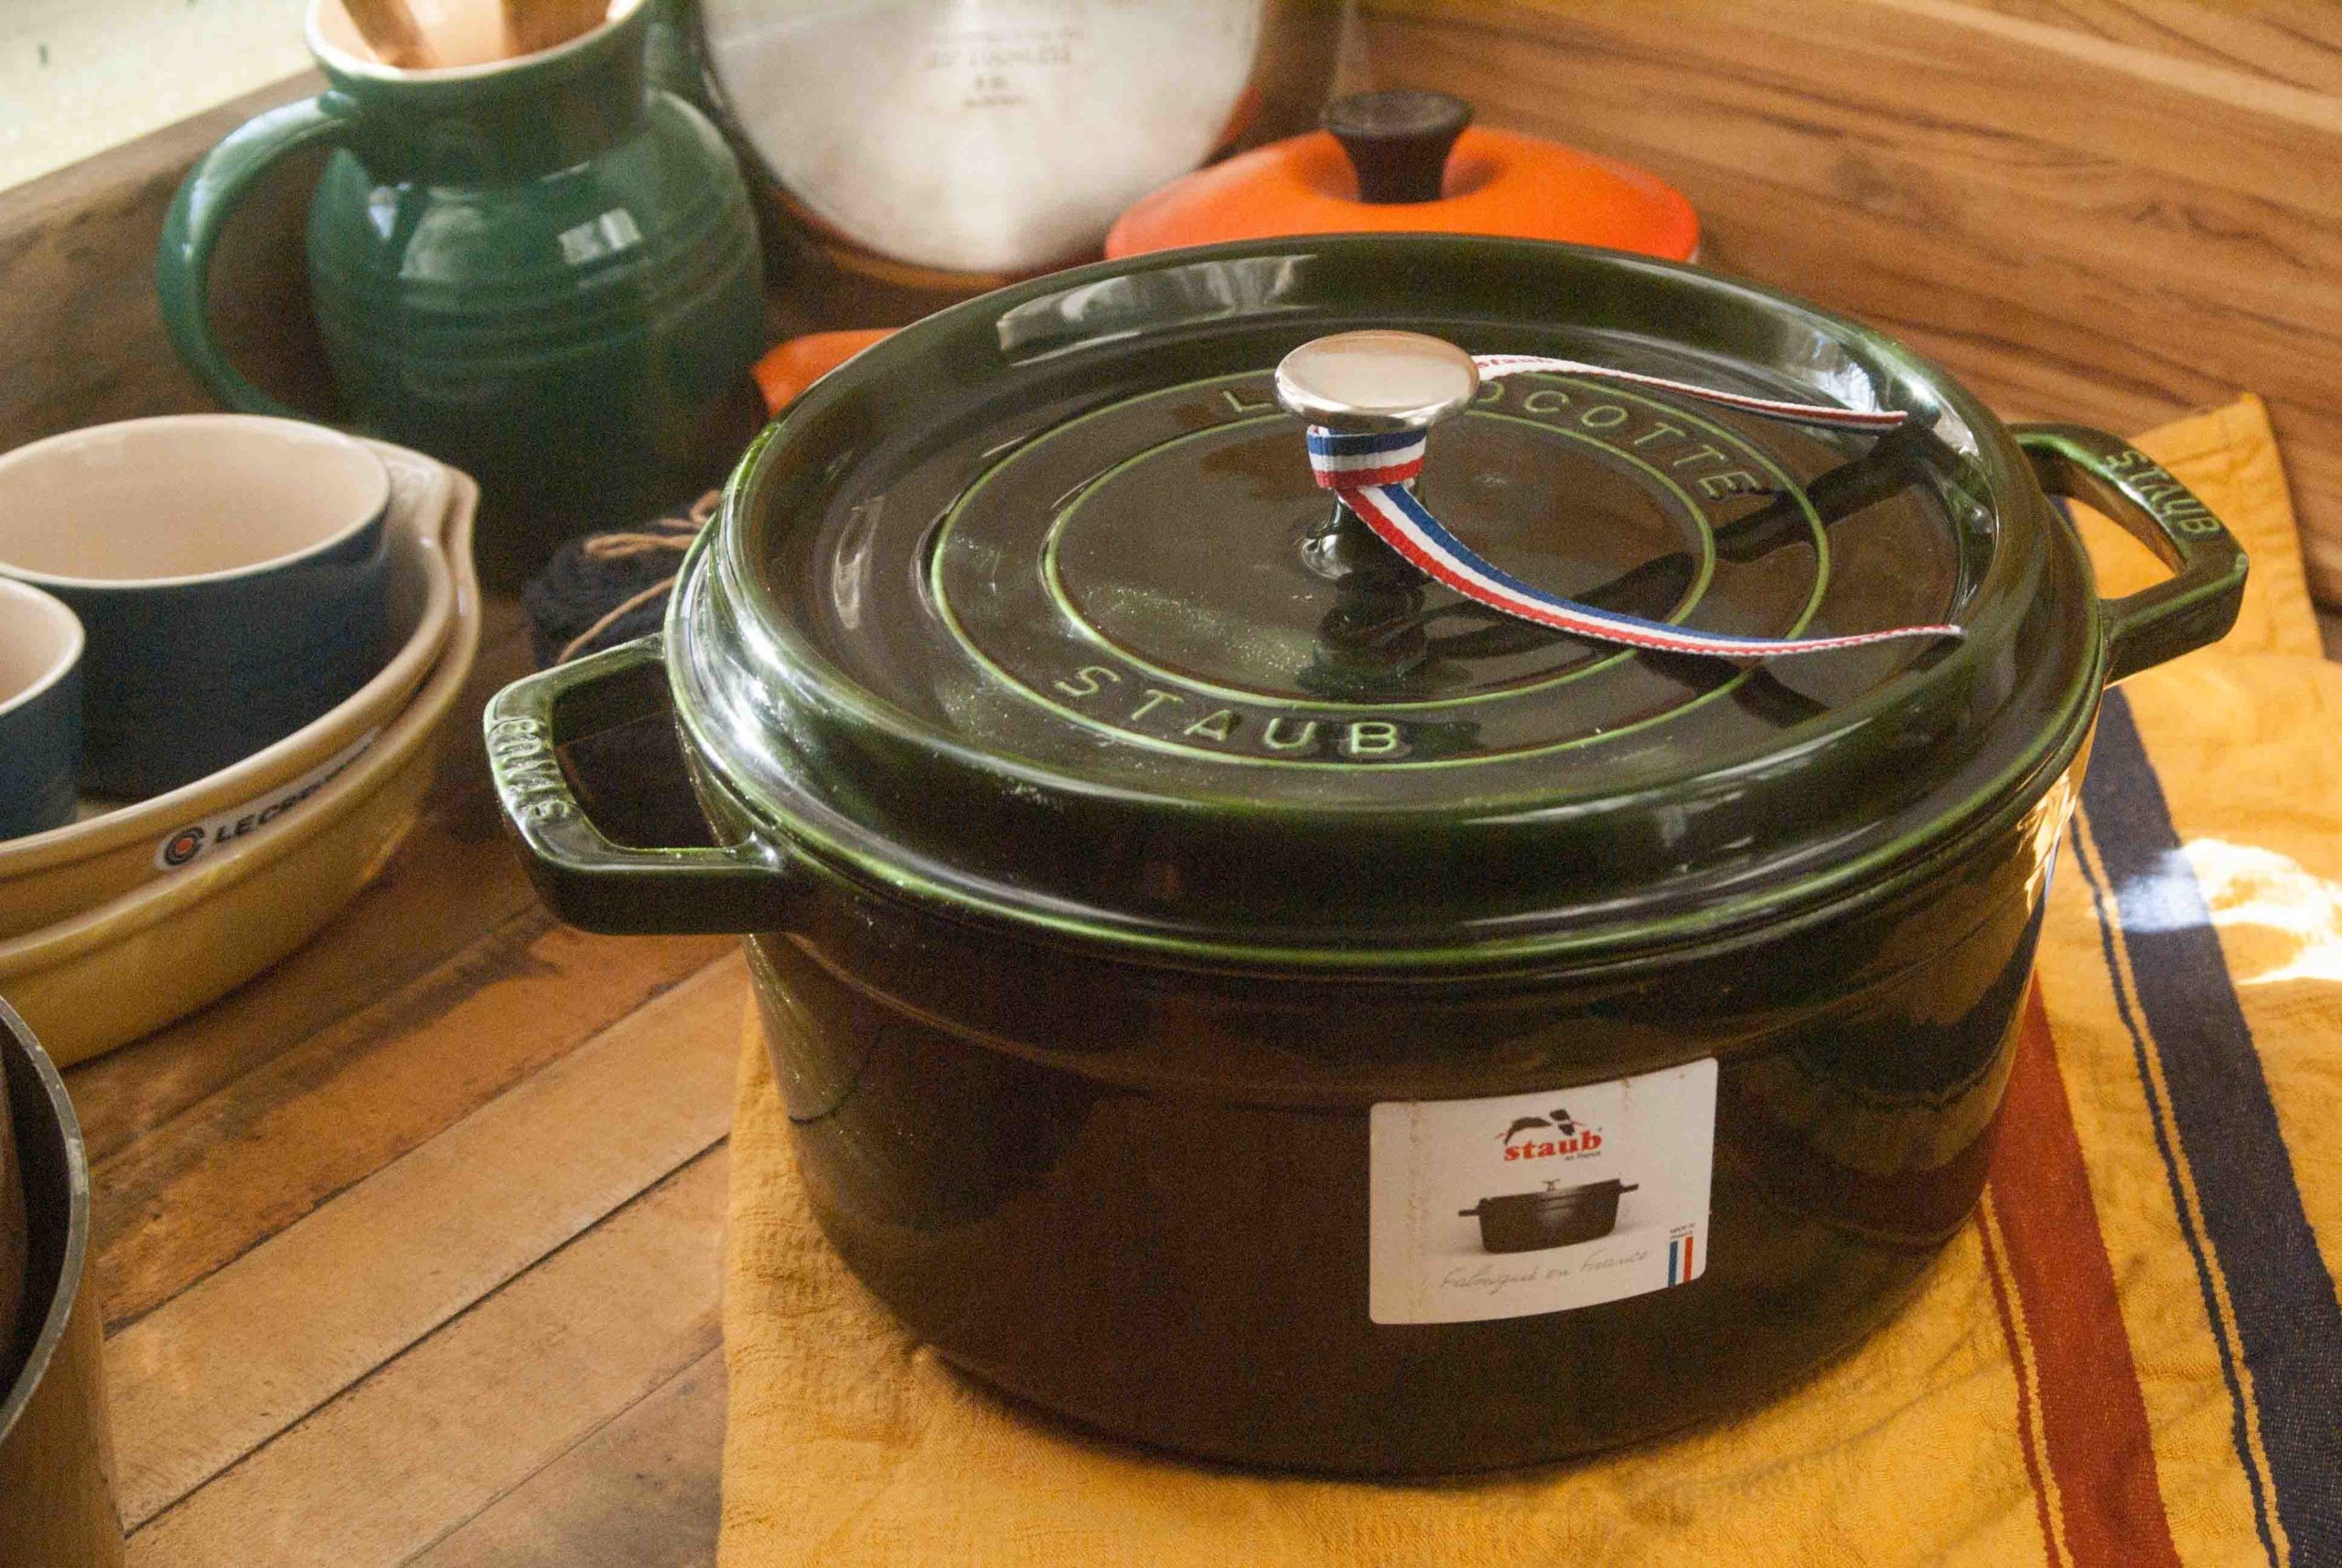 orkest Algemeen Misbruik Staub vs Le Creuset Dutch Oven and Lodge - Who is the Best?